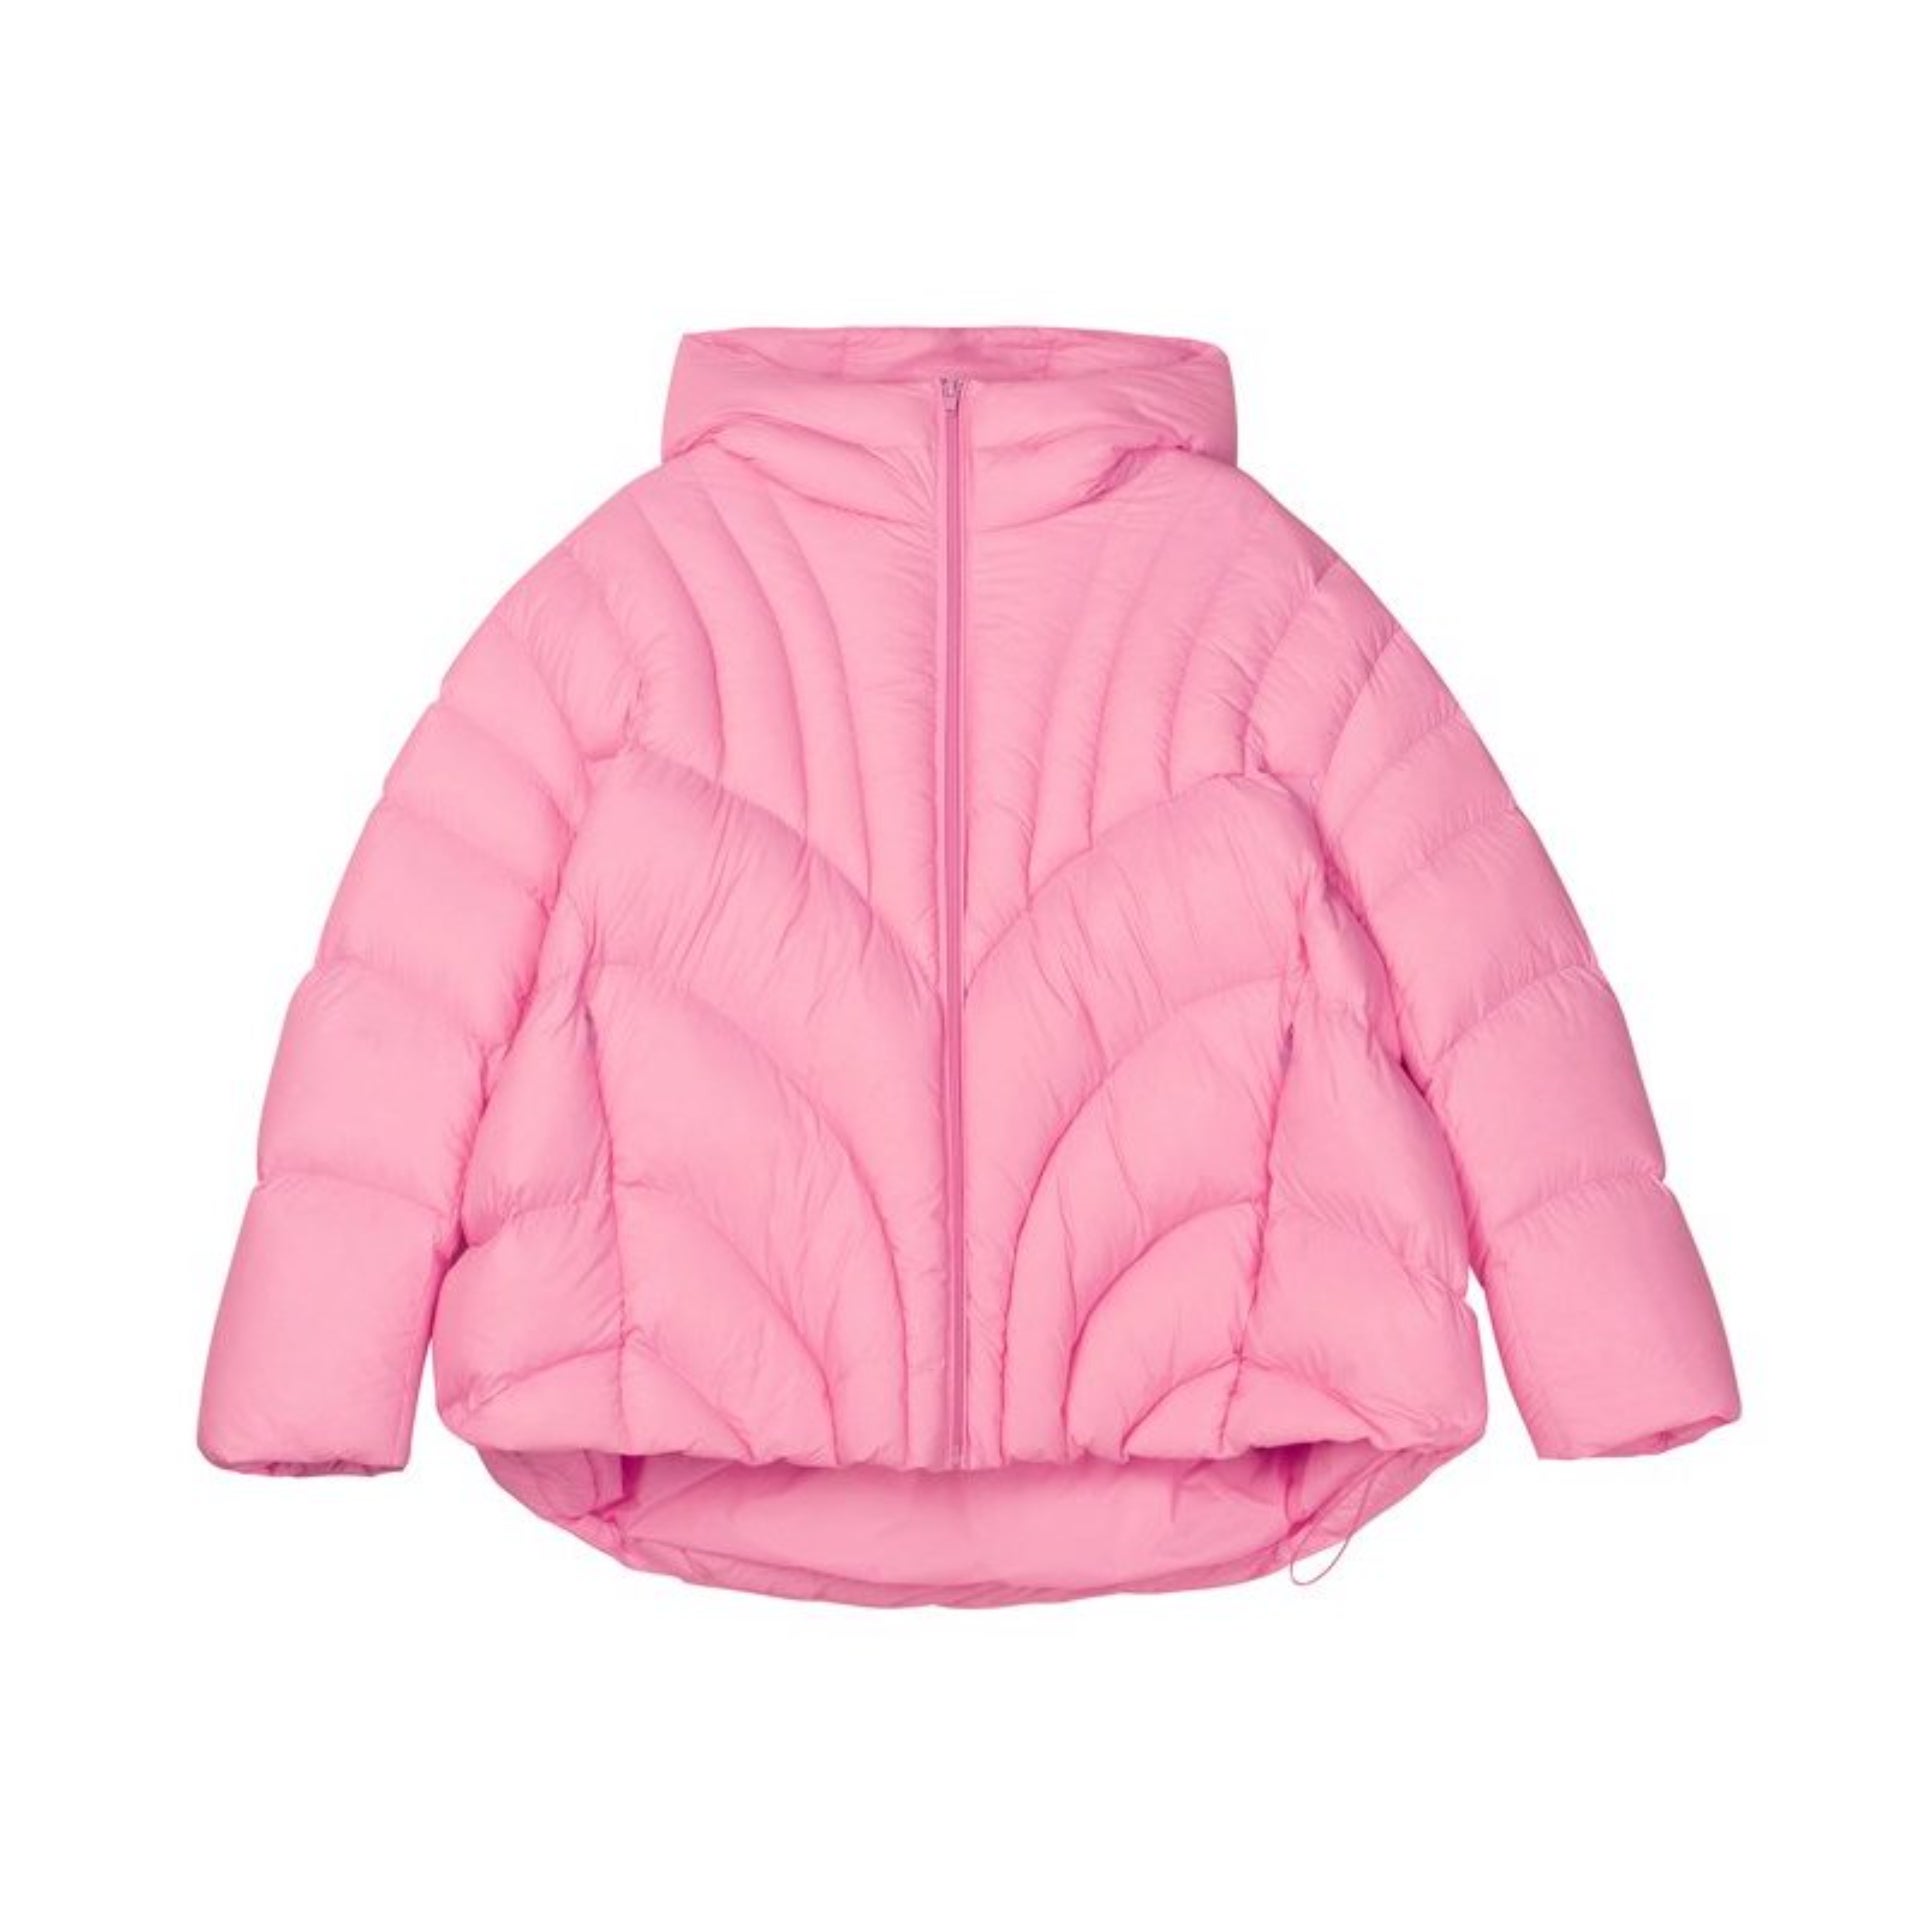 These Puffer Jackets Are The Most Fashionable Way To Stay Warm